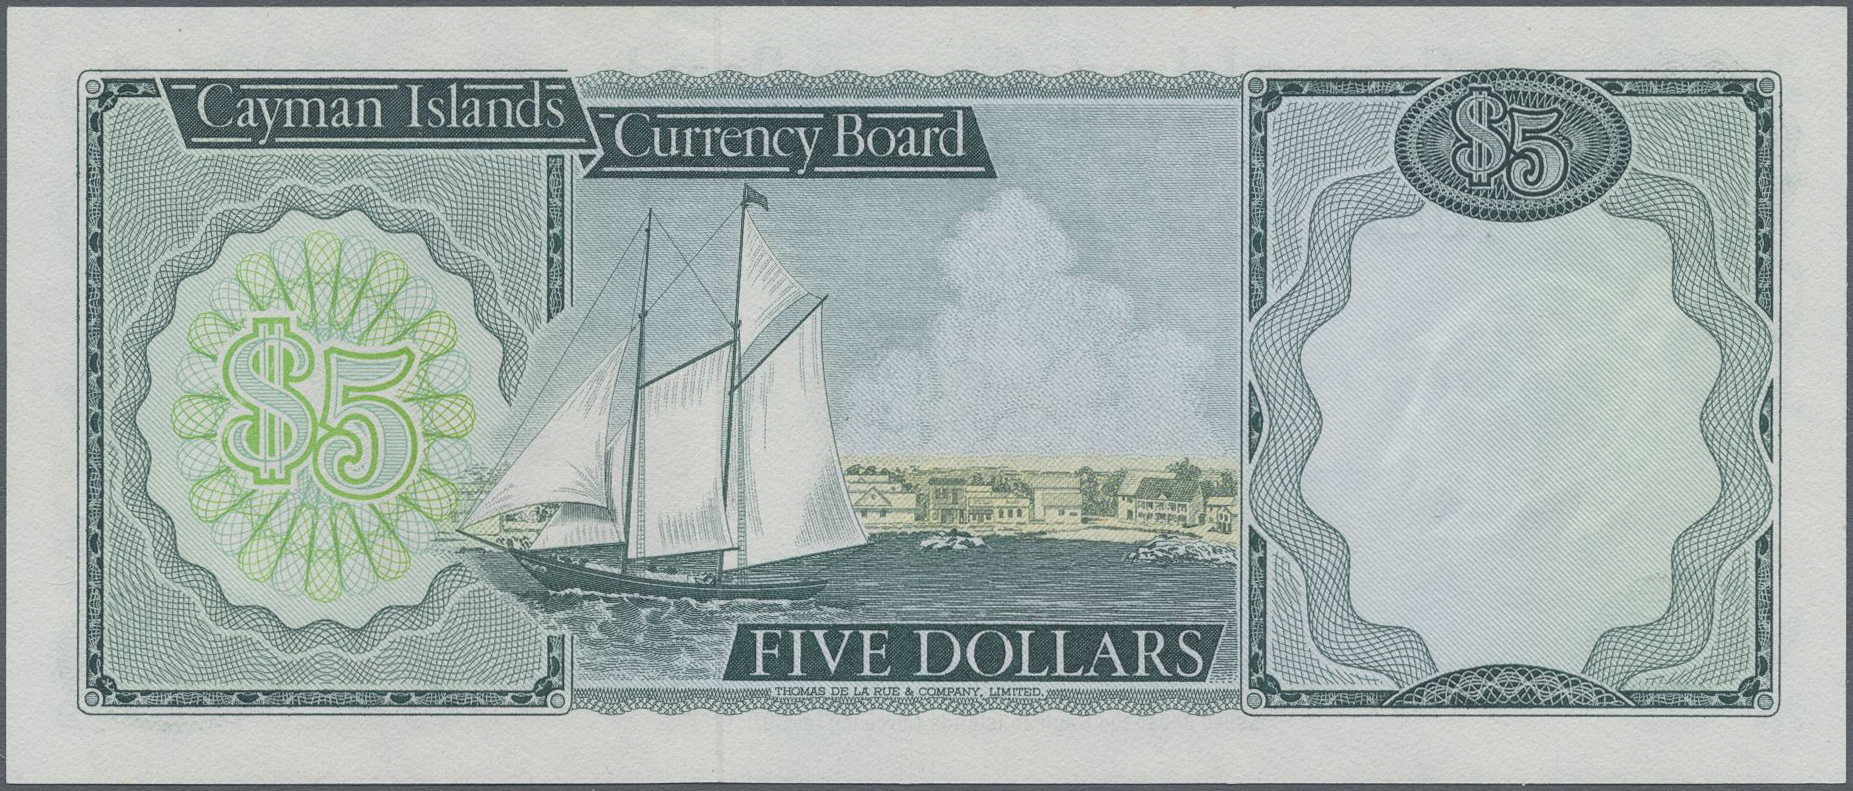 Lot 00137 - Cayman Islands | Banknoten  -  Auktionshaus Christoph Gärtner GmbH & Co. KG 55th AUCTION - Day 1